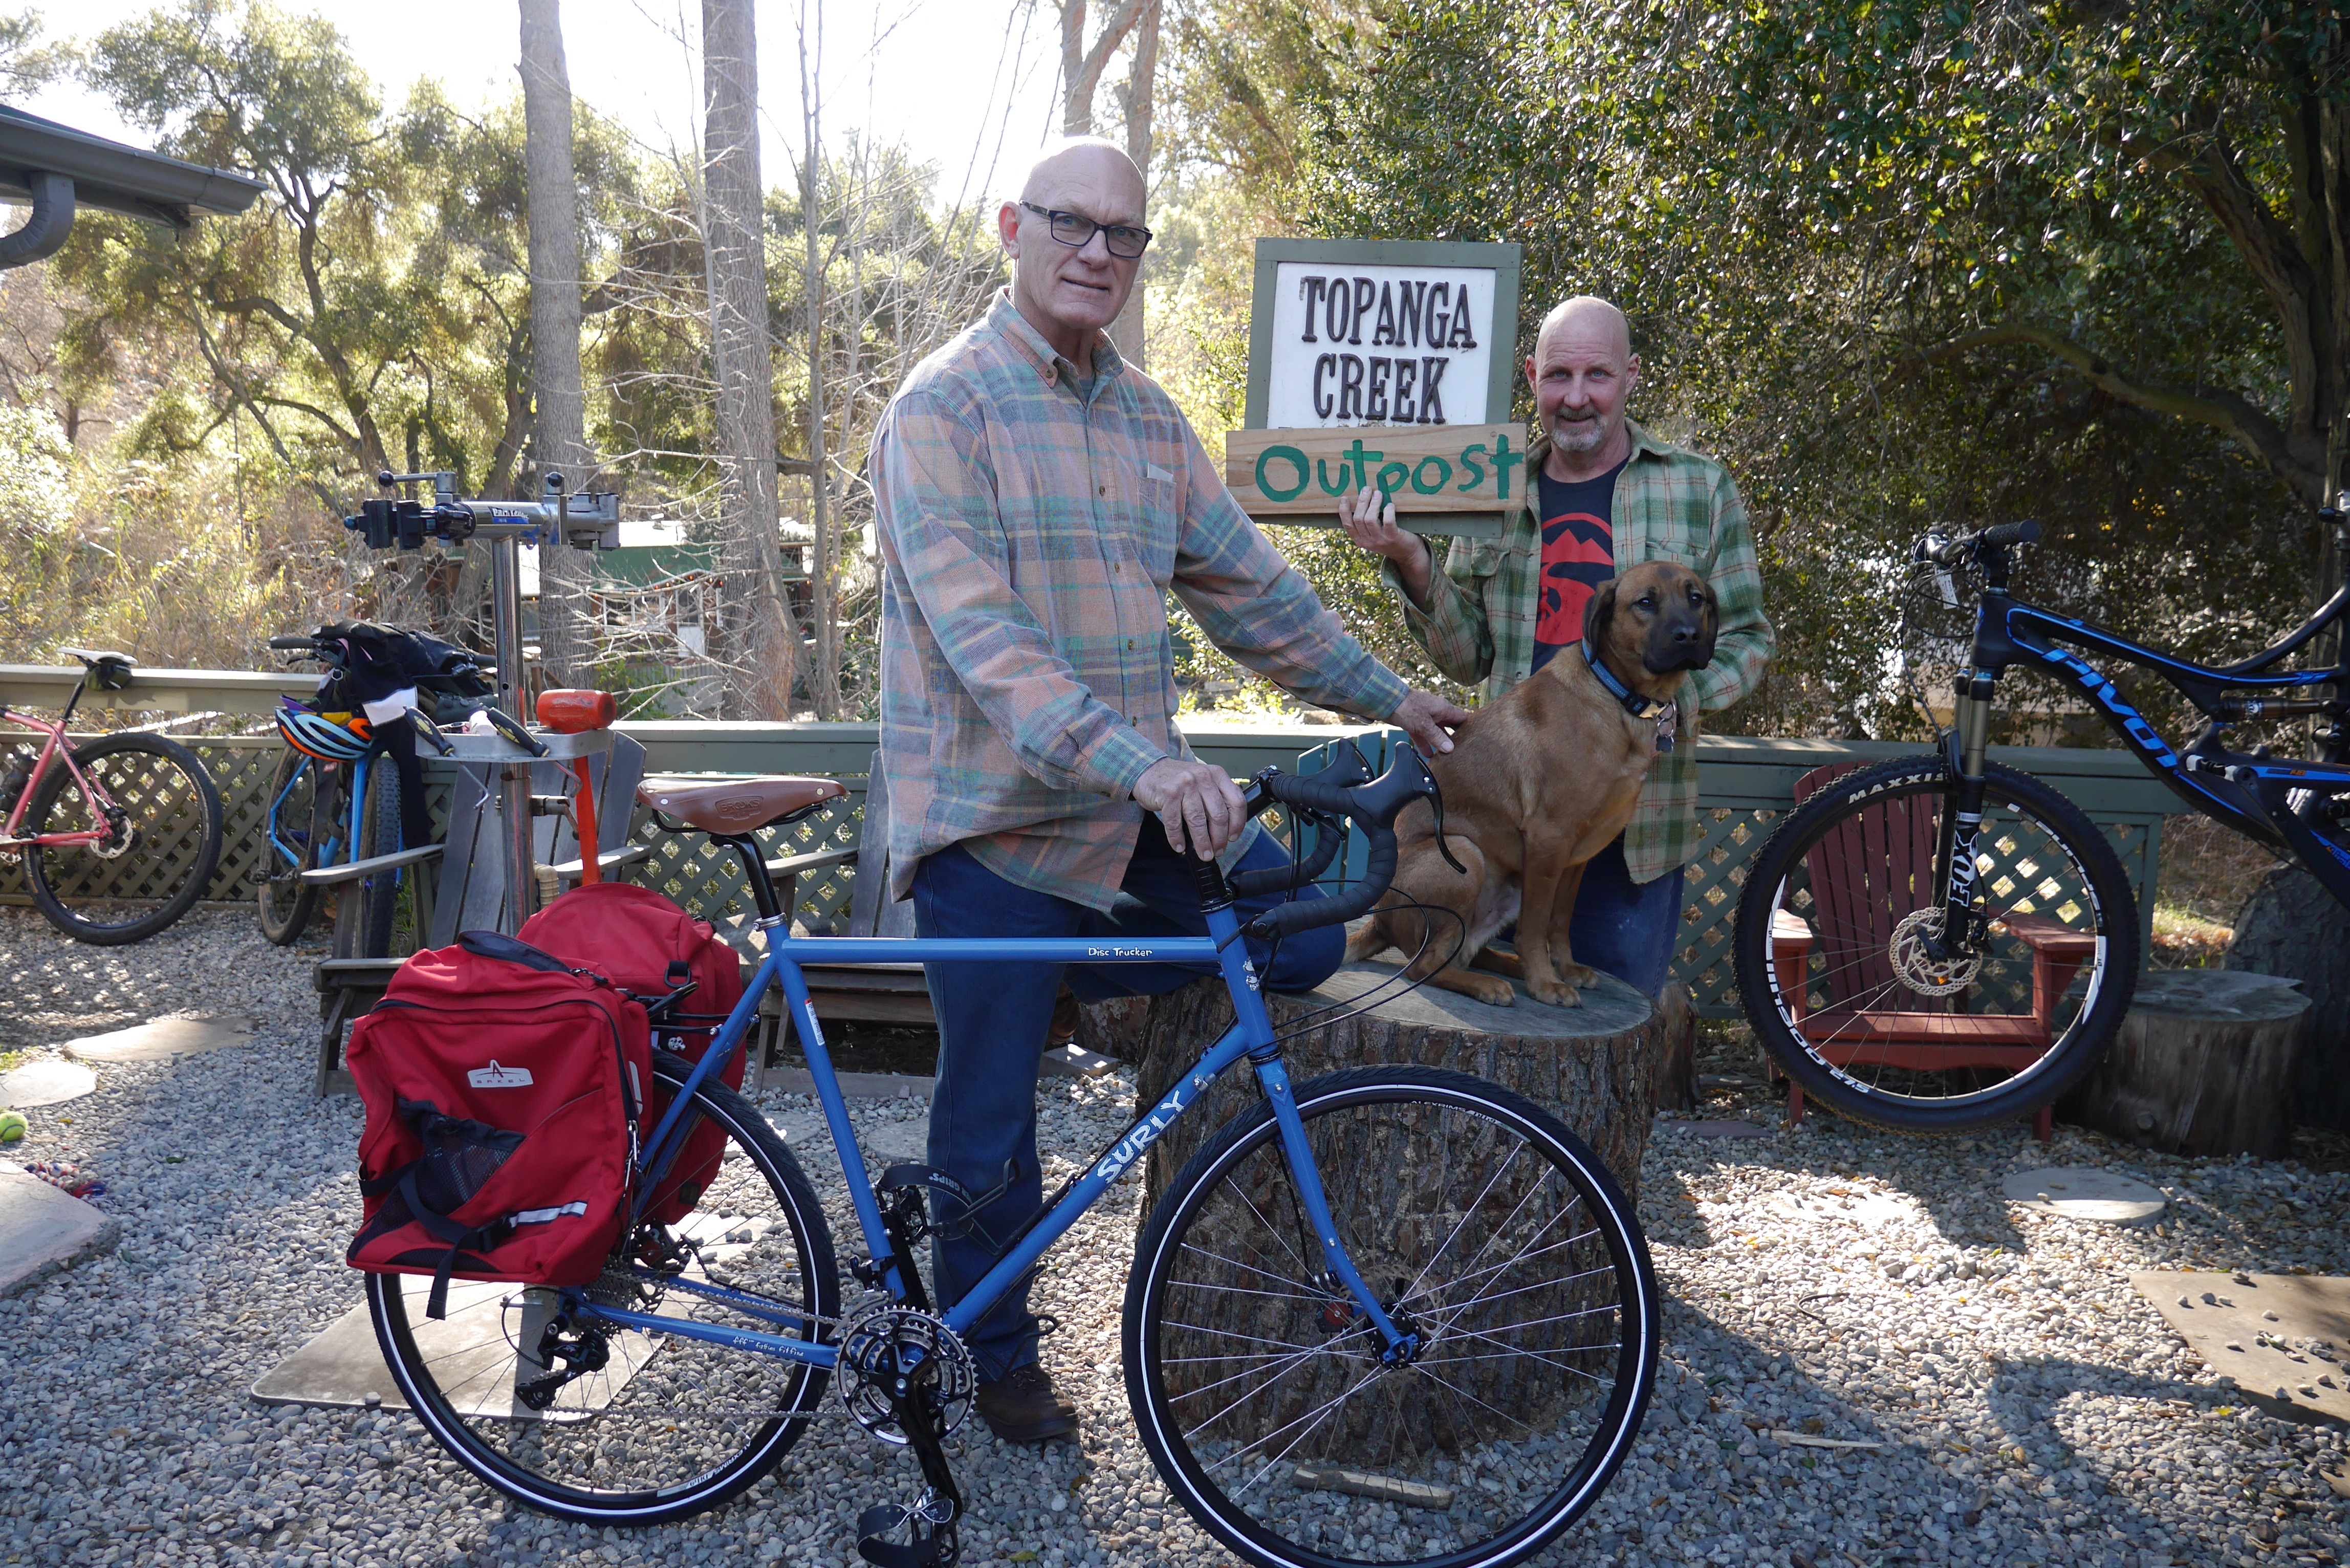 Jeff has a 1000 mile trip plan and his new Surly Long Haul Trucker is the right bike. We set him up with panniers, a rack and couldn't be happier to see him on his new bike. He showed up at the gift exchange moment and joined right in.